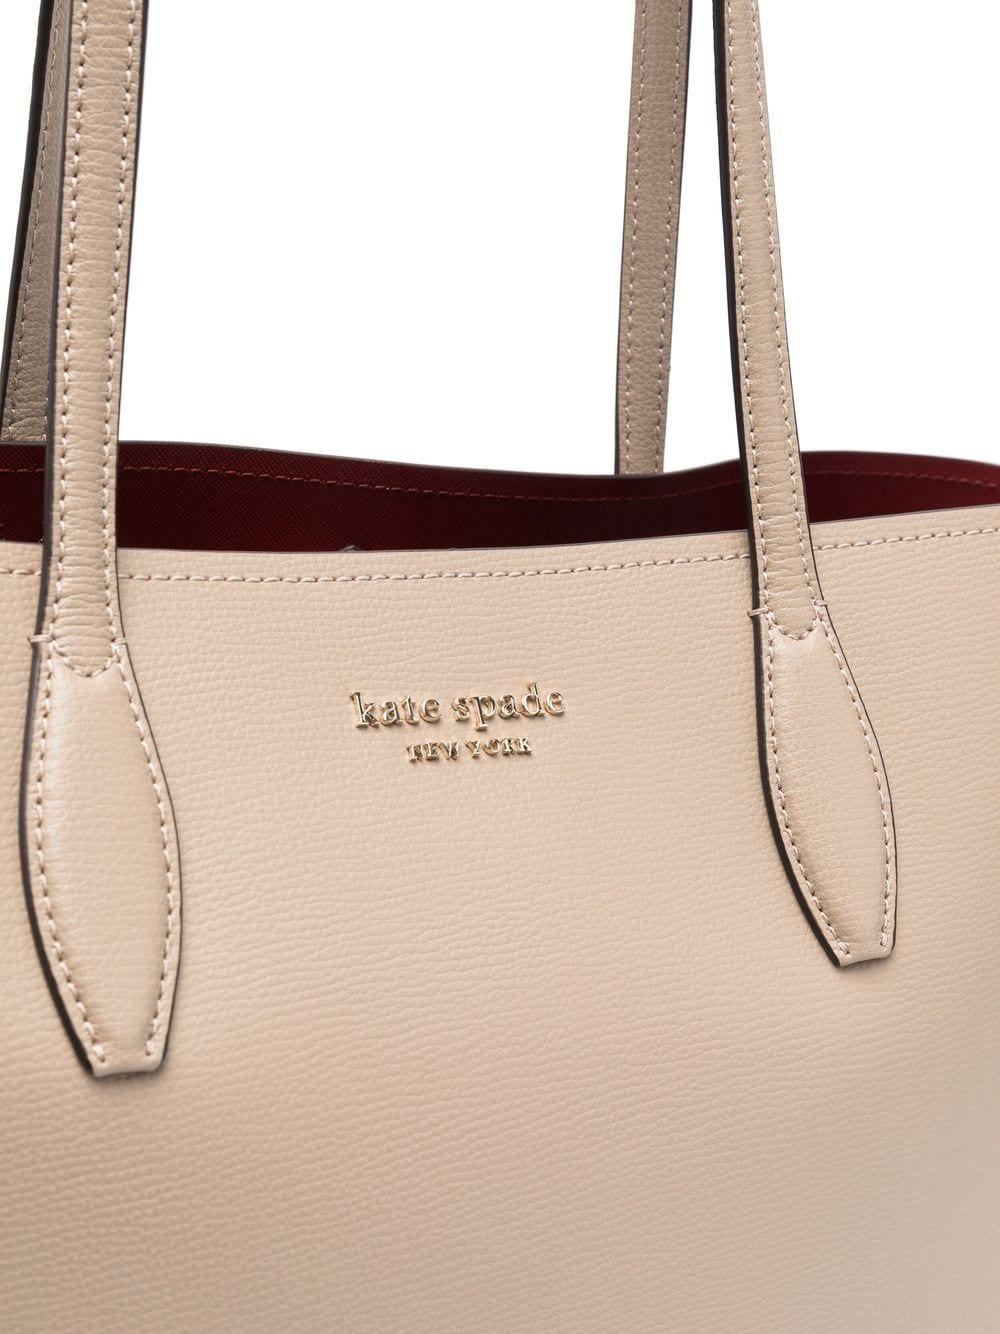 Kate Spade All Day Leather Tote Bag - Farfetch